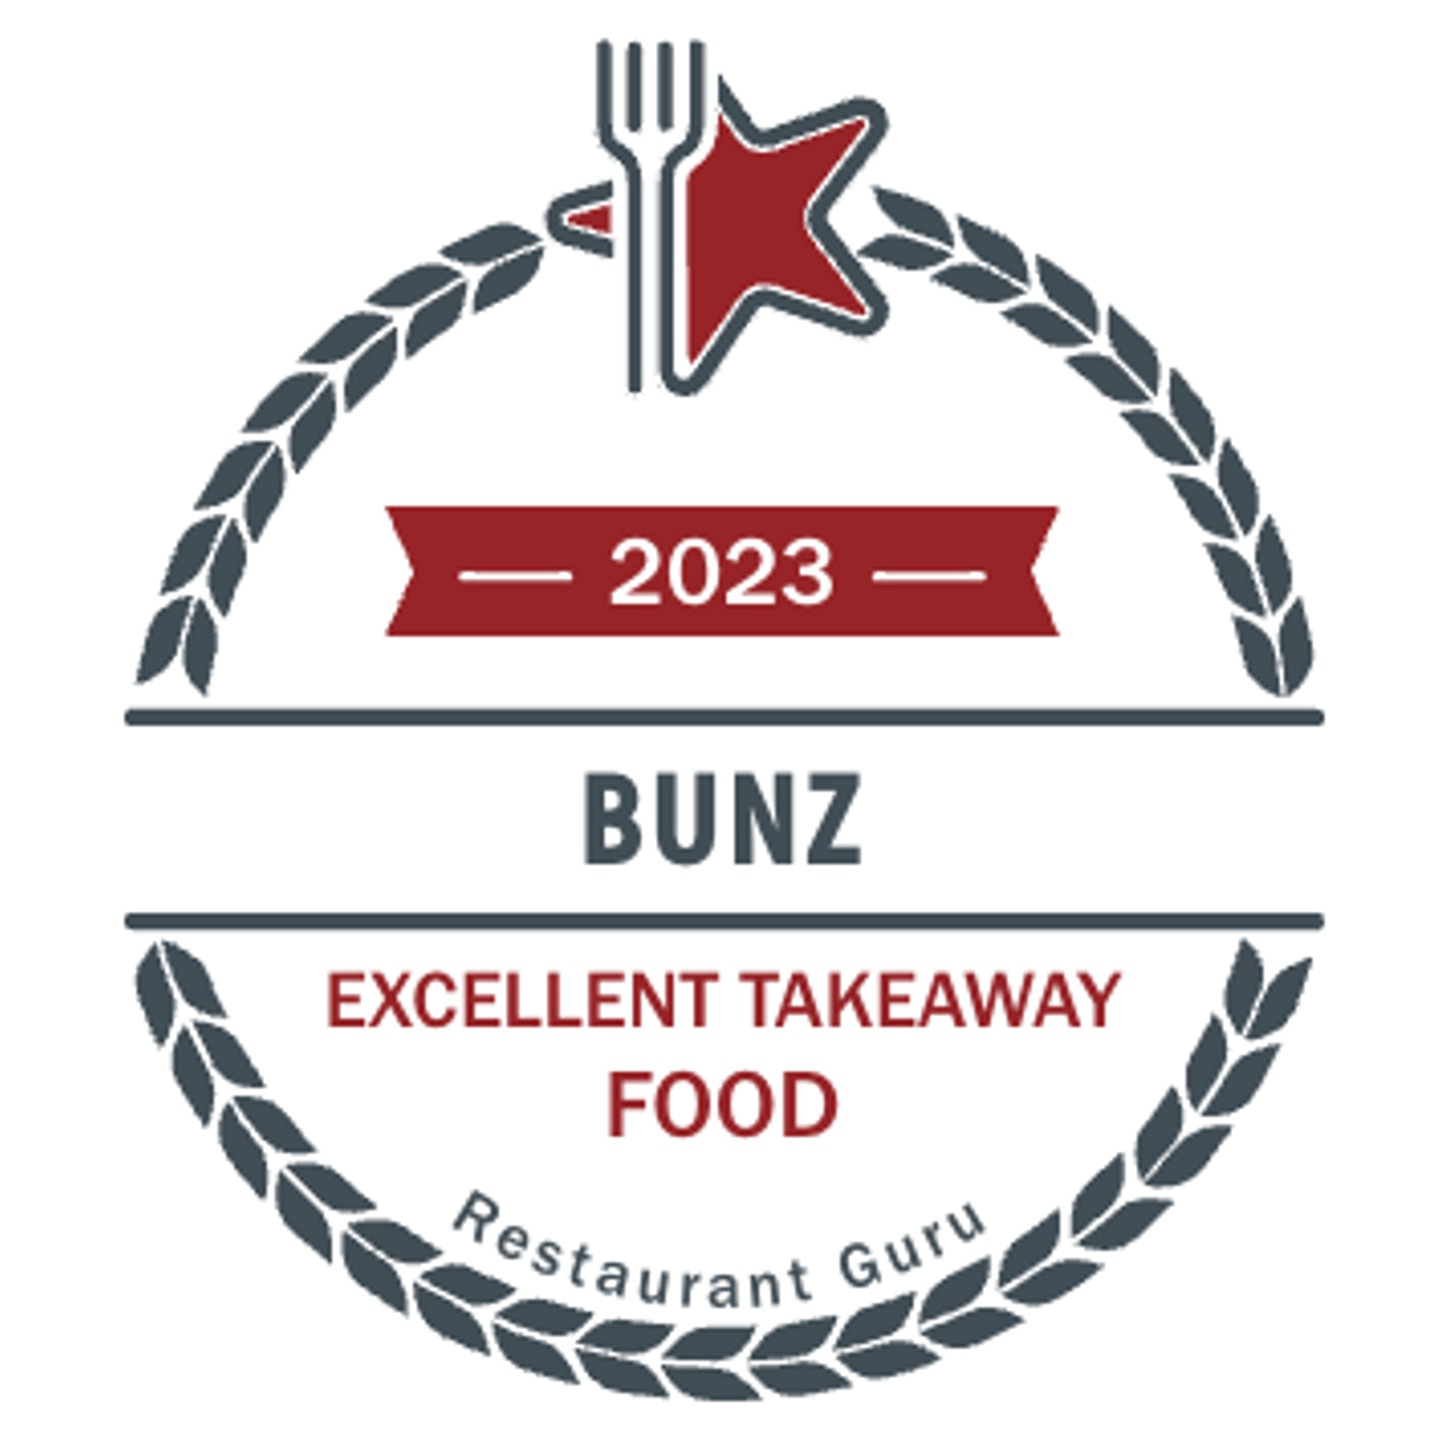 Voted 2023 Excellent Takeaway Food